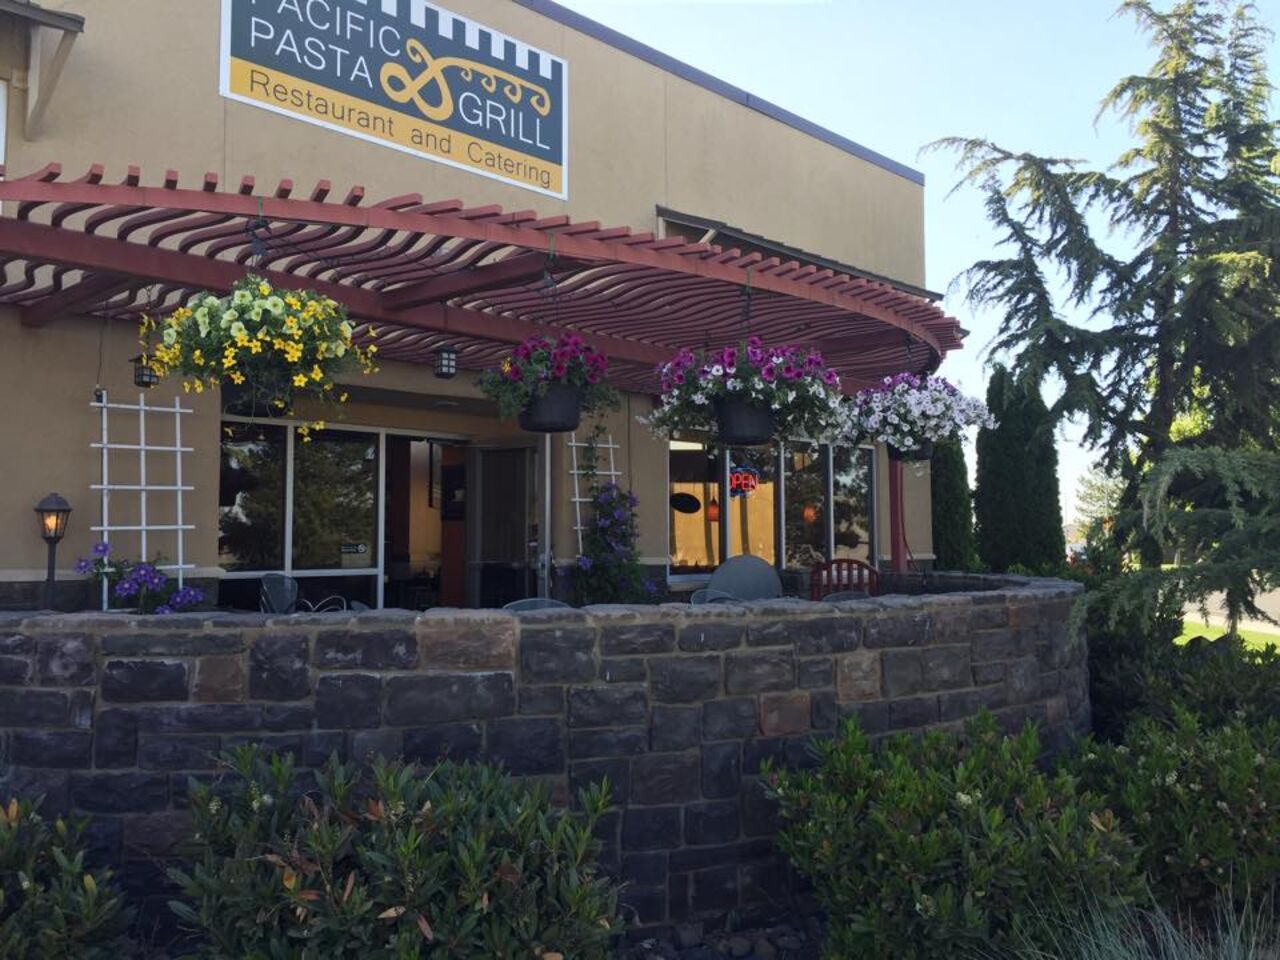 A photo of Pacific Pasta and Grill